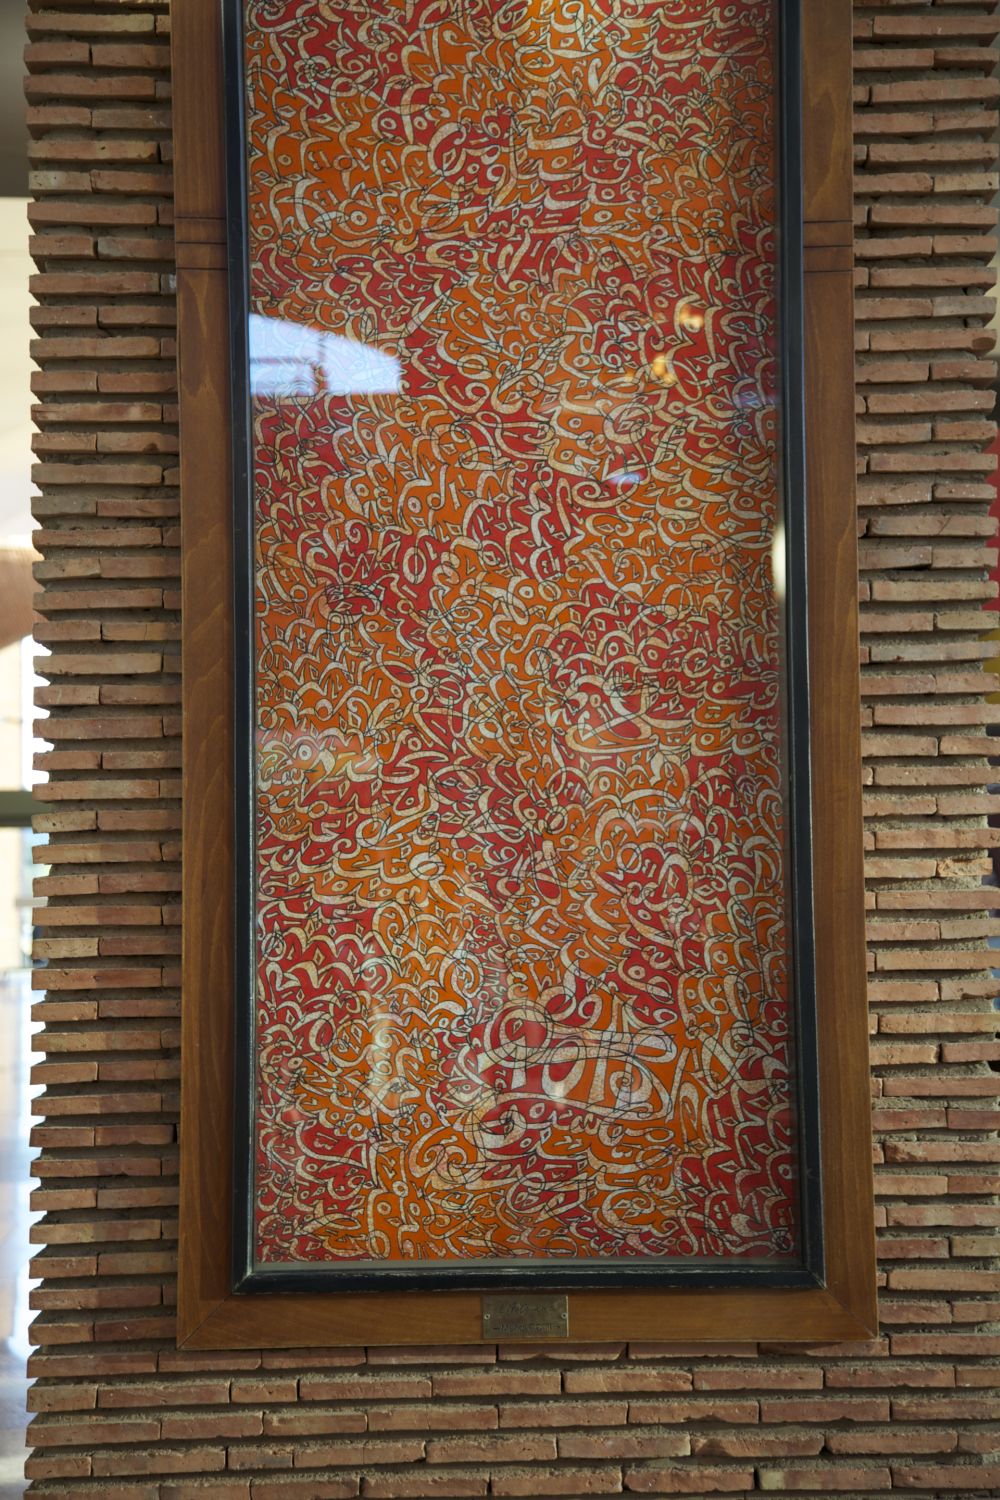 Railway Station (Marrakech) - Interior, partial view, calligraphy work by Mehdi Qotbi on canvas